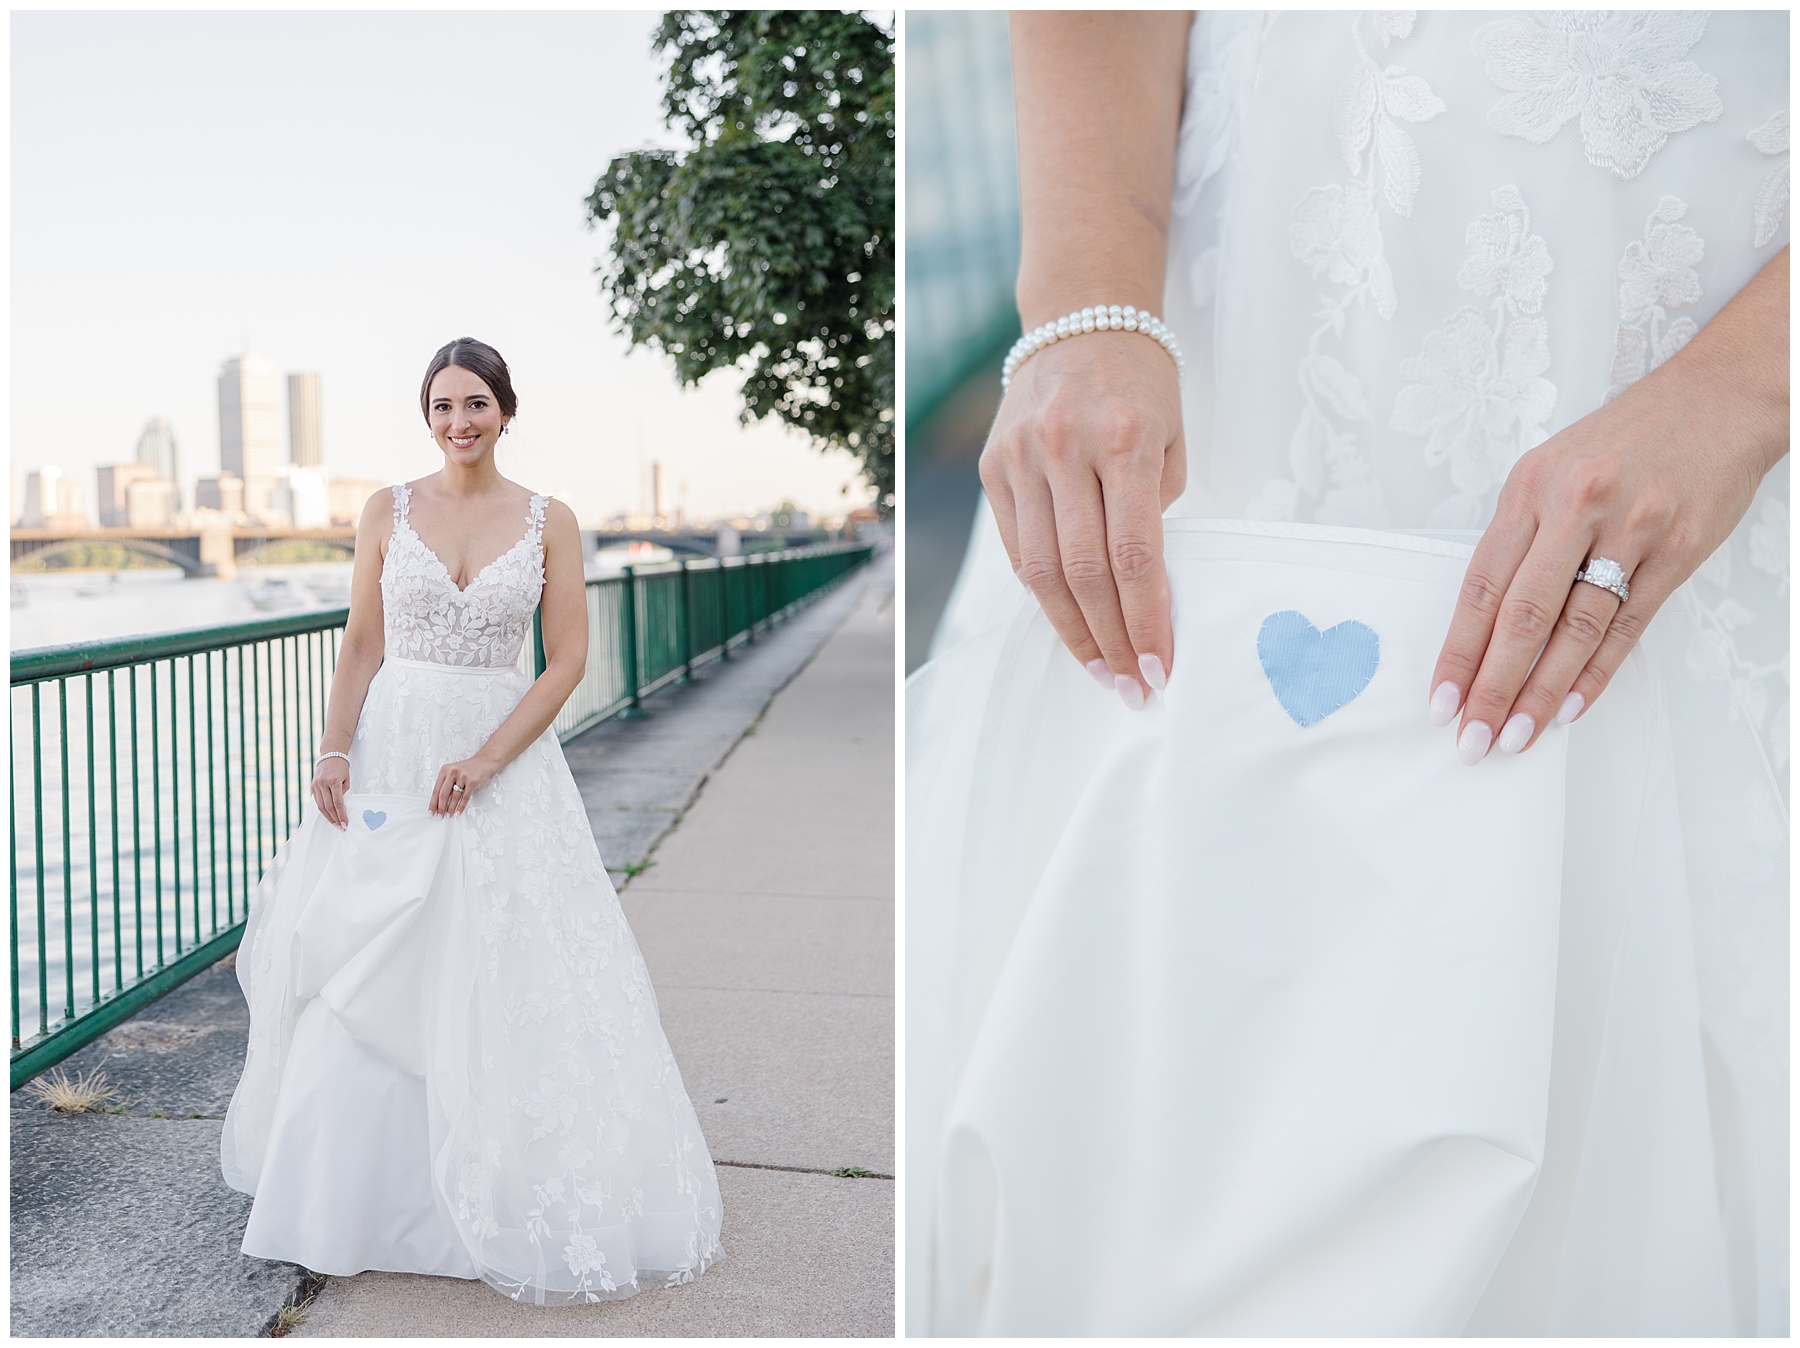 Bride showing off her "something blue" heart stitched in her wedding dress